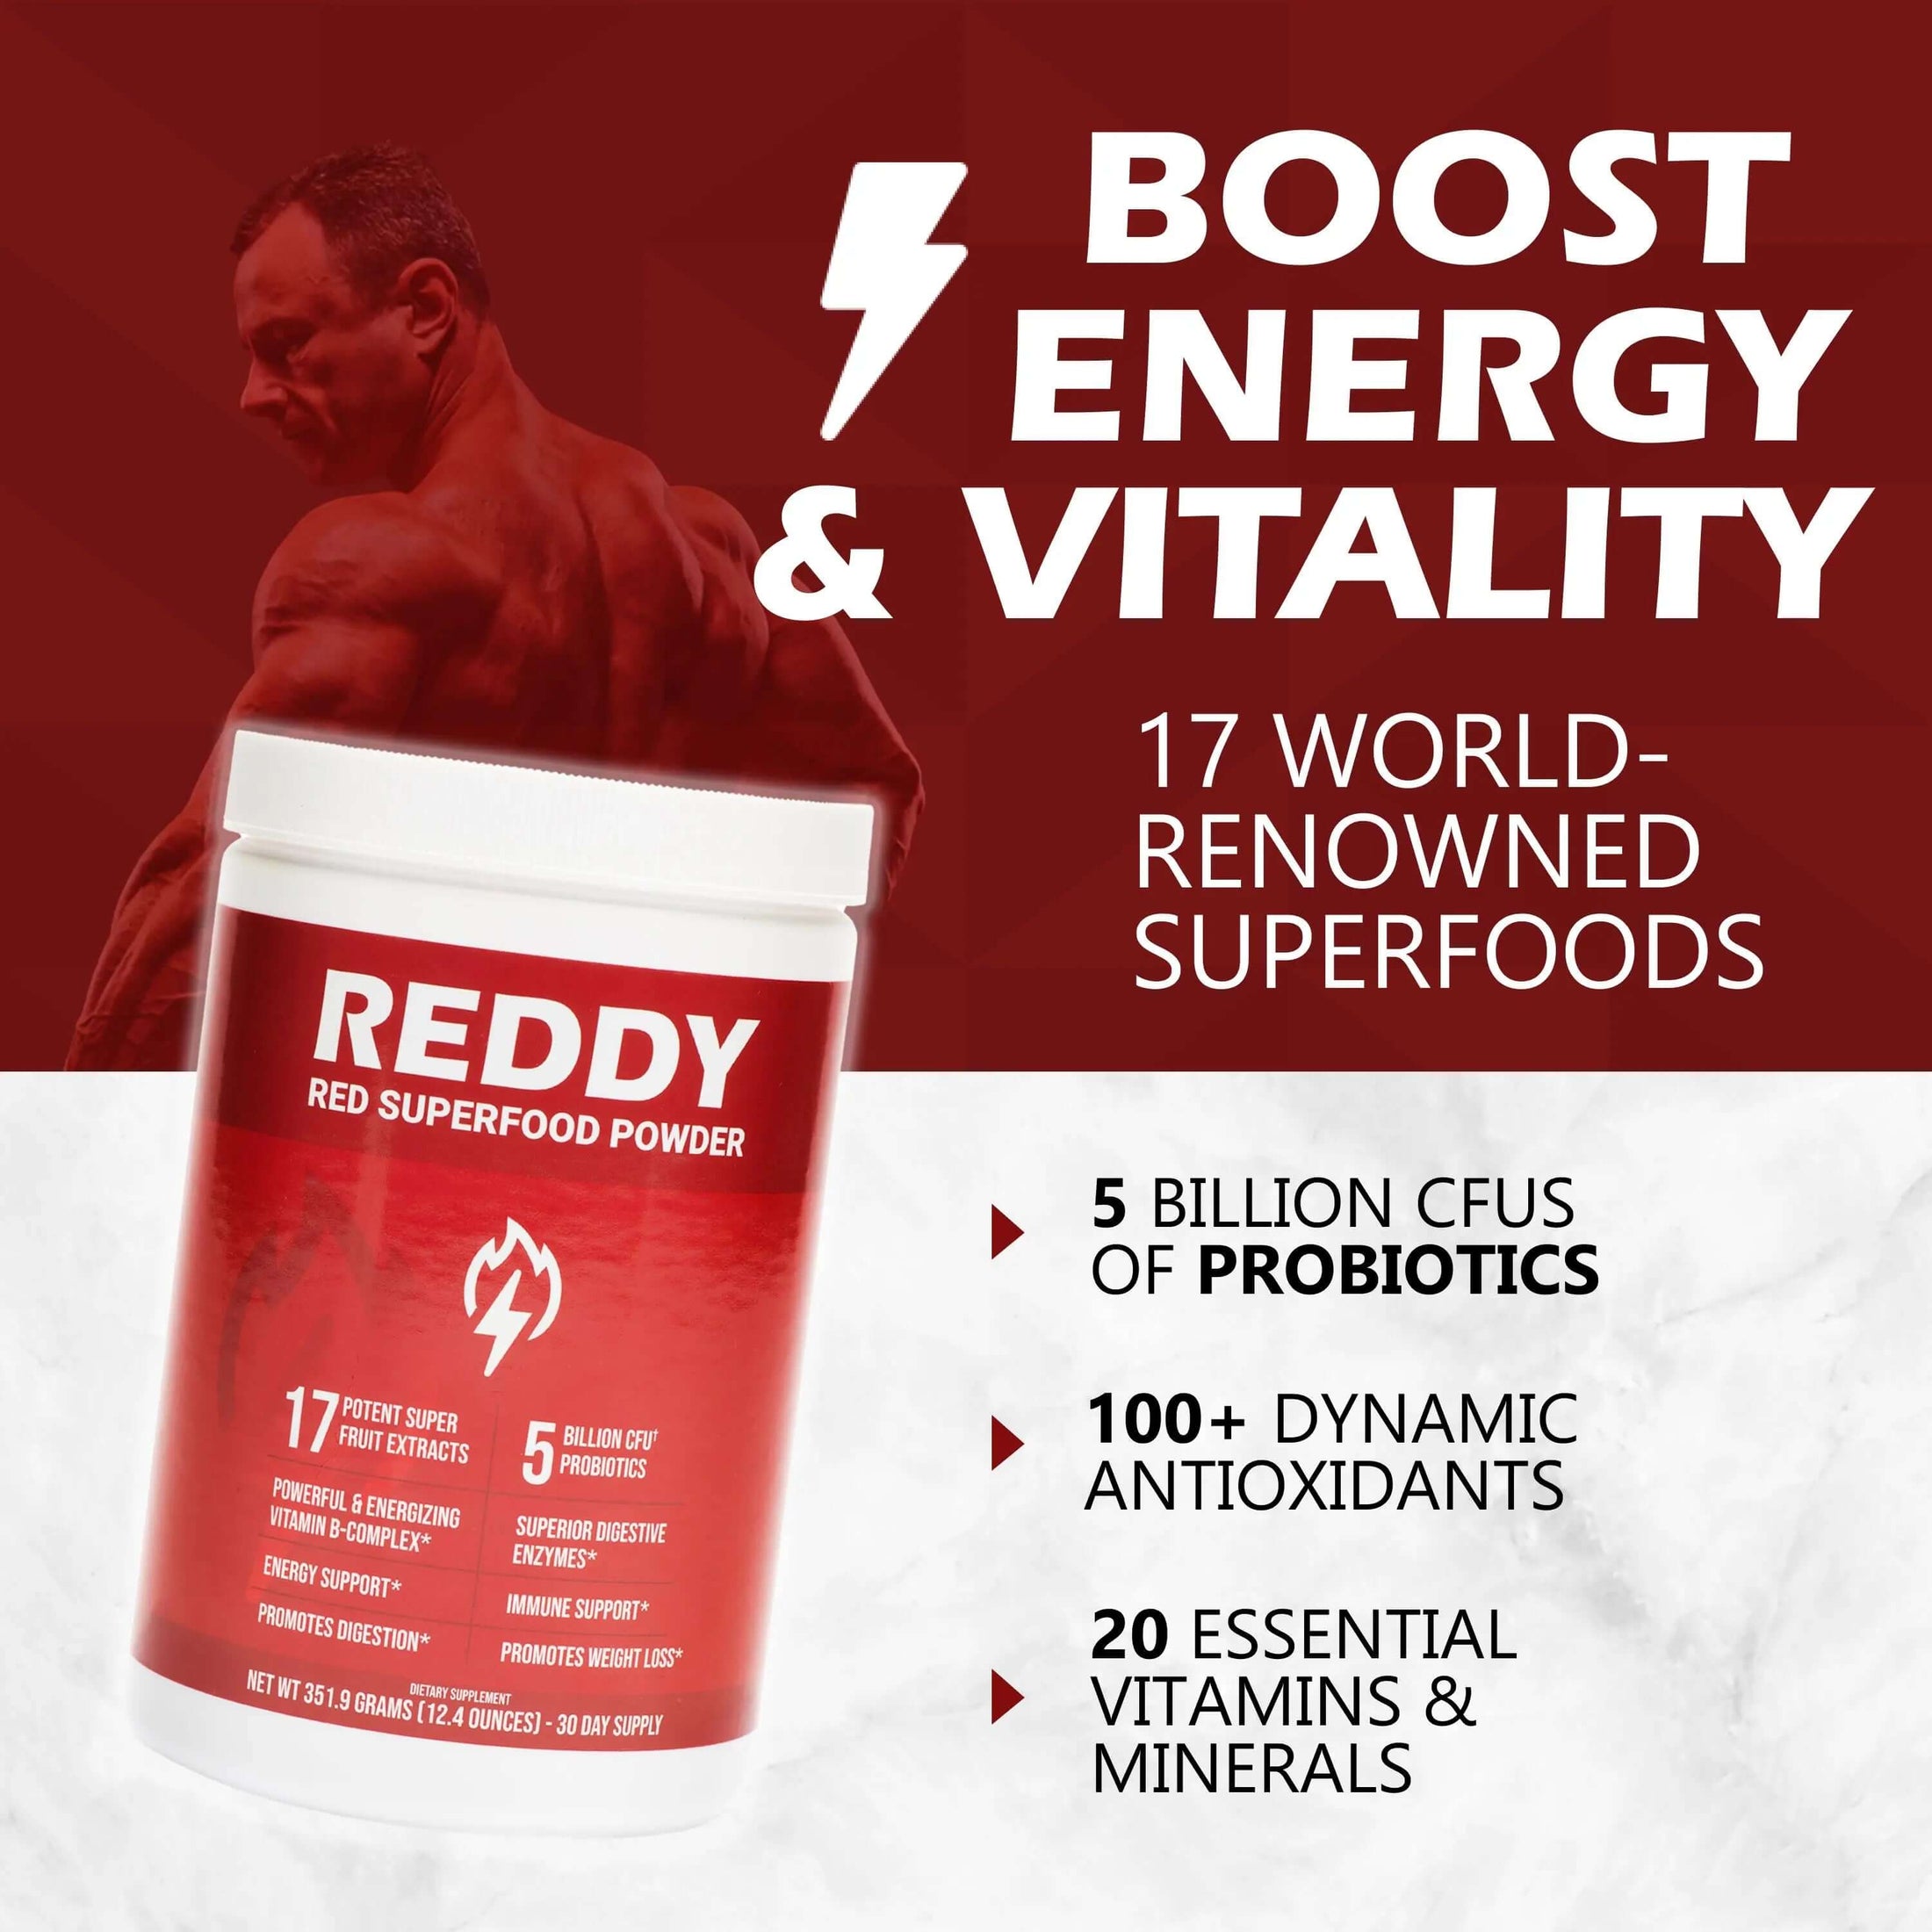 Dynamic image of an active individual enjoying a post-workout smoothie made with Reddy Red Organic Superfood Powder, visually demonstrating the product's energy and vitality boosting properties.